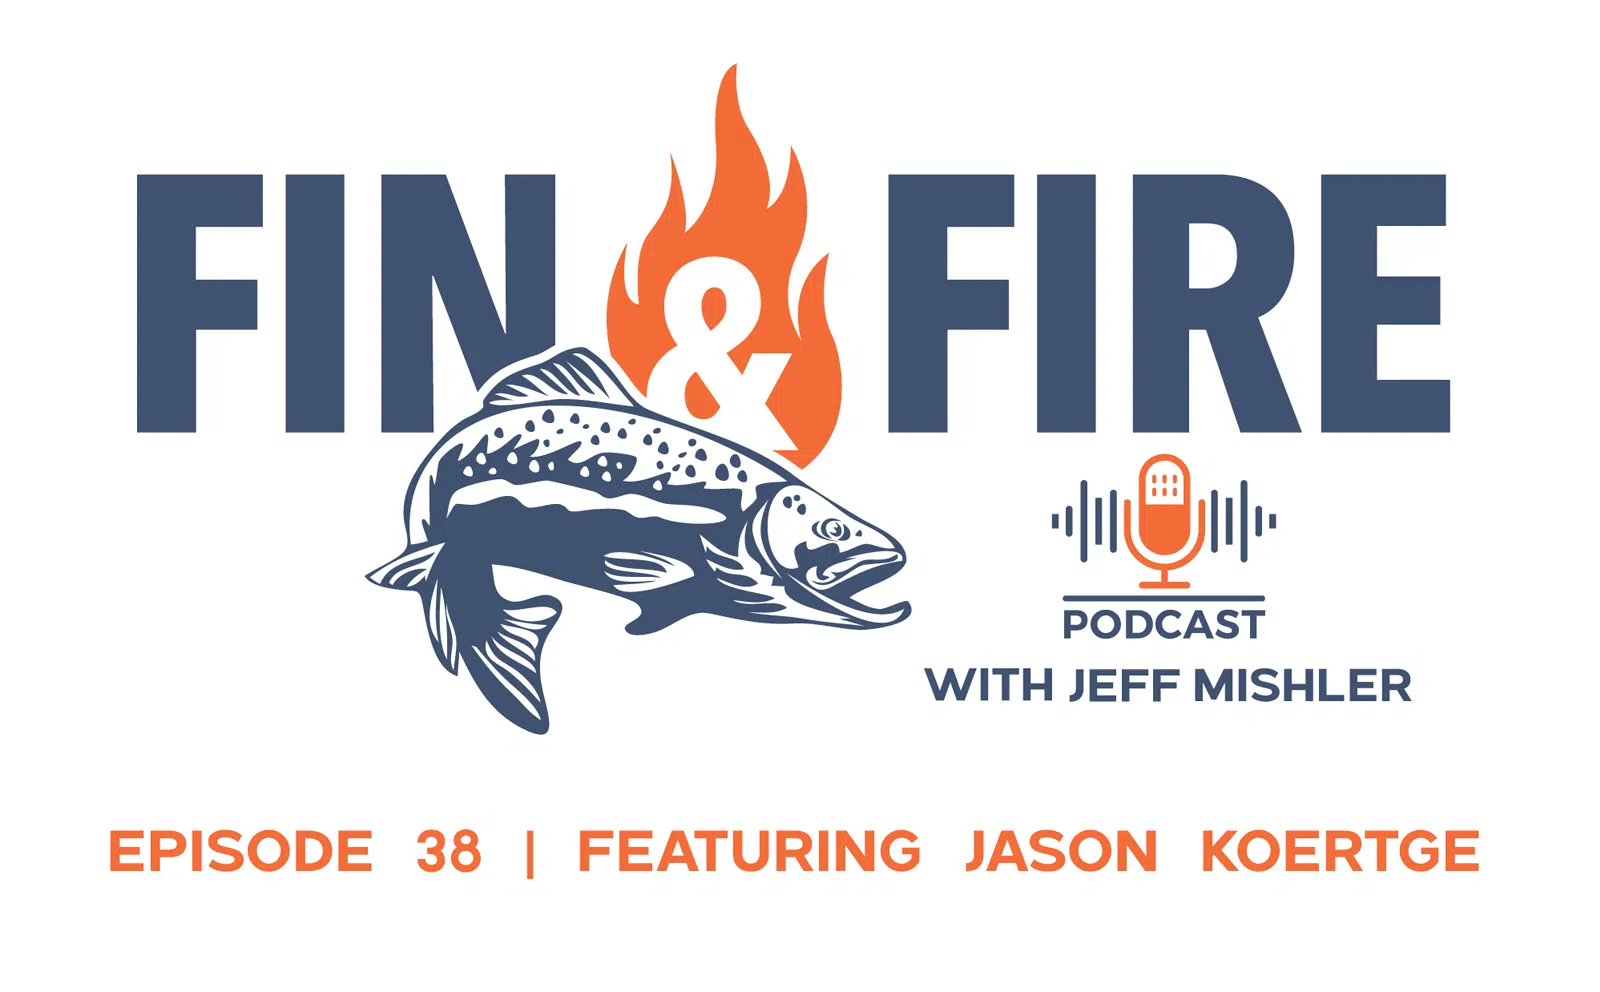 Episode 38 Featuring Jason Koertge---Hunter, Angler, Creator Of Authentic Content In The Outdoor Realm